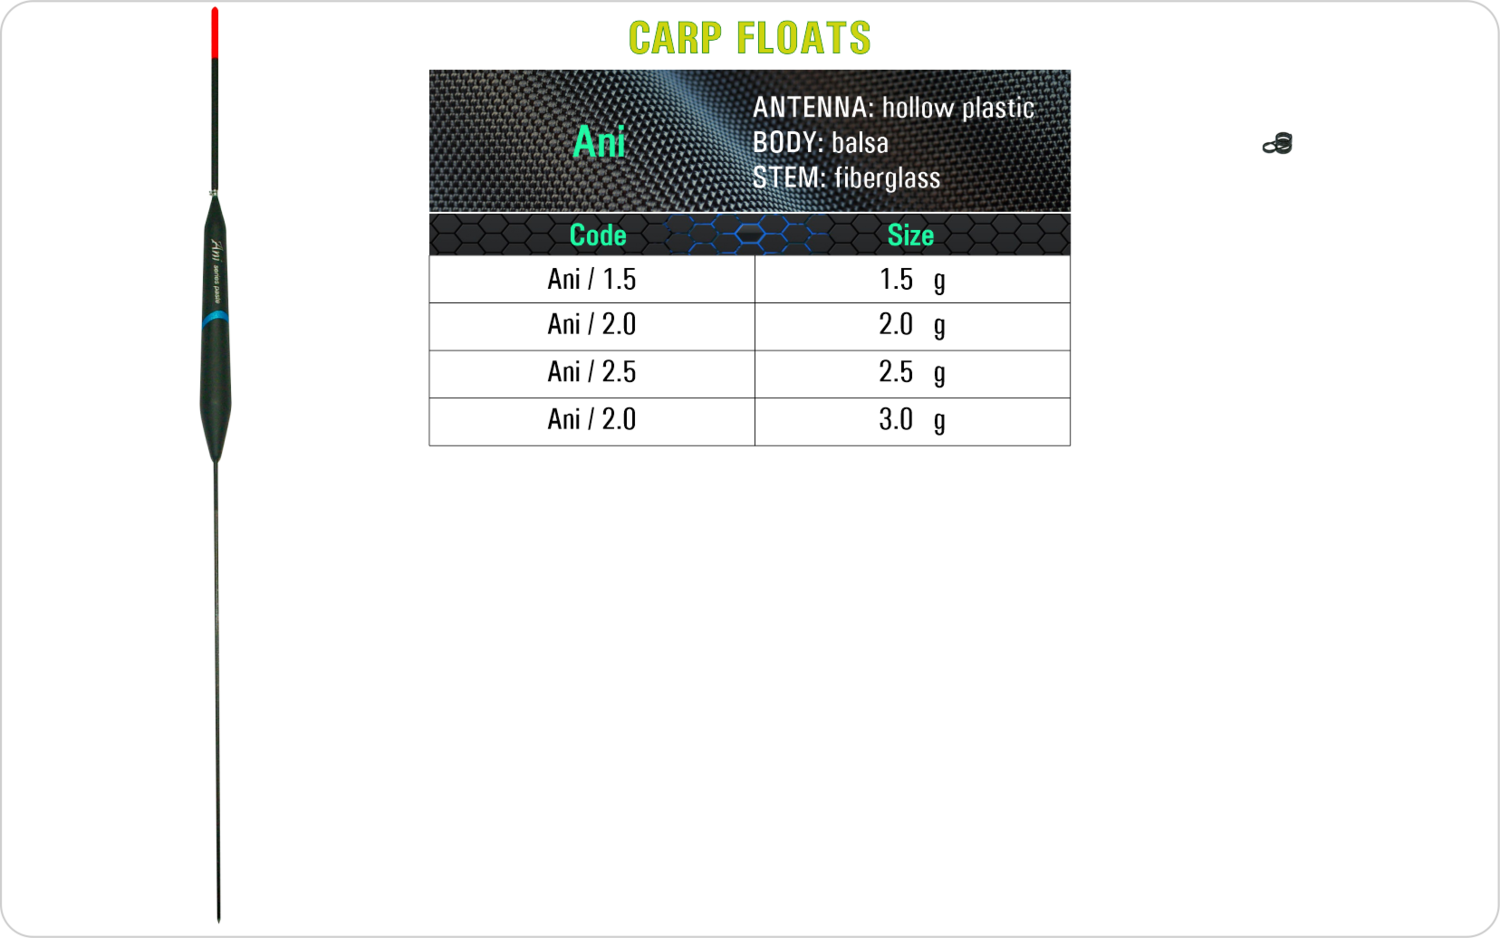 SF Ani Carp float model and table containing an additional information about this float with different codes, sizes, types of the body, the stem and the antenna of the float.